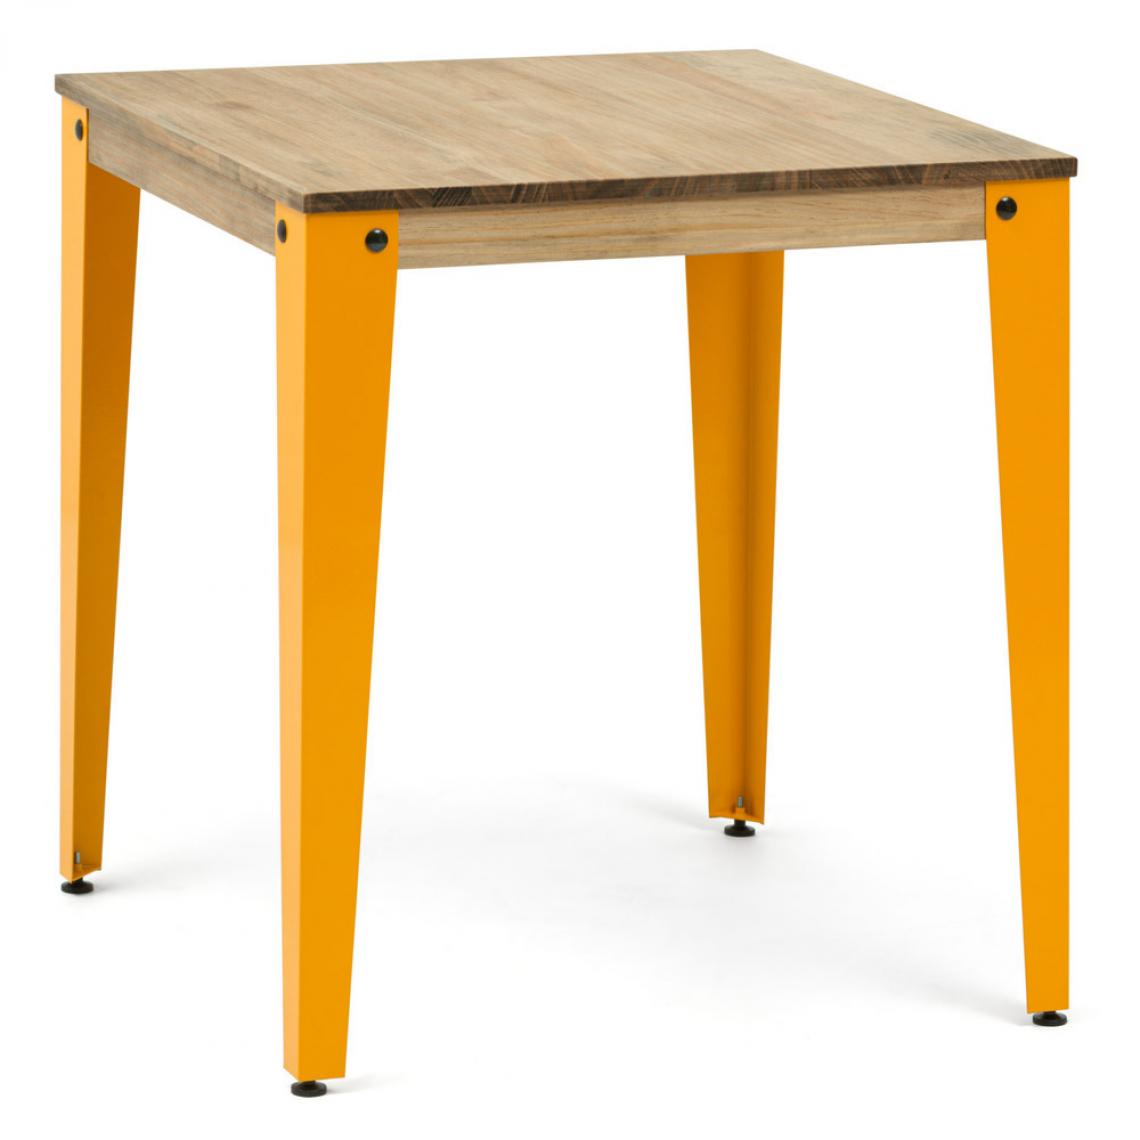 BOX FURNITURE - Table Salle à Manger Lunds 70x70x75cm Jaune-Vieilli Box Furniture - Tables à manger